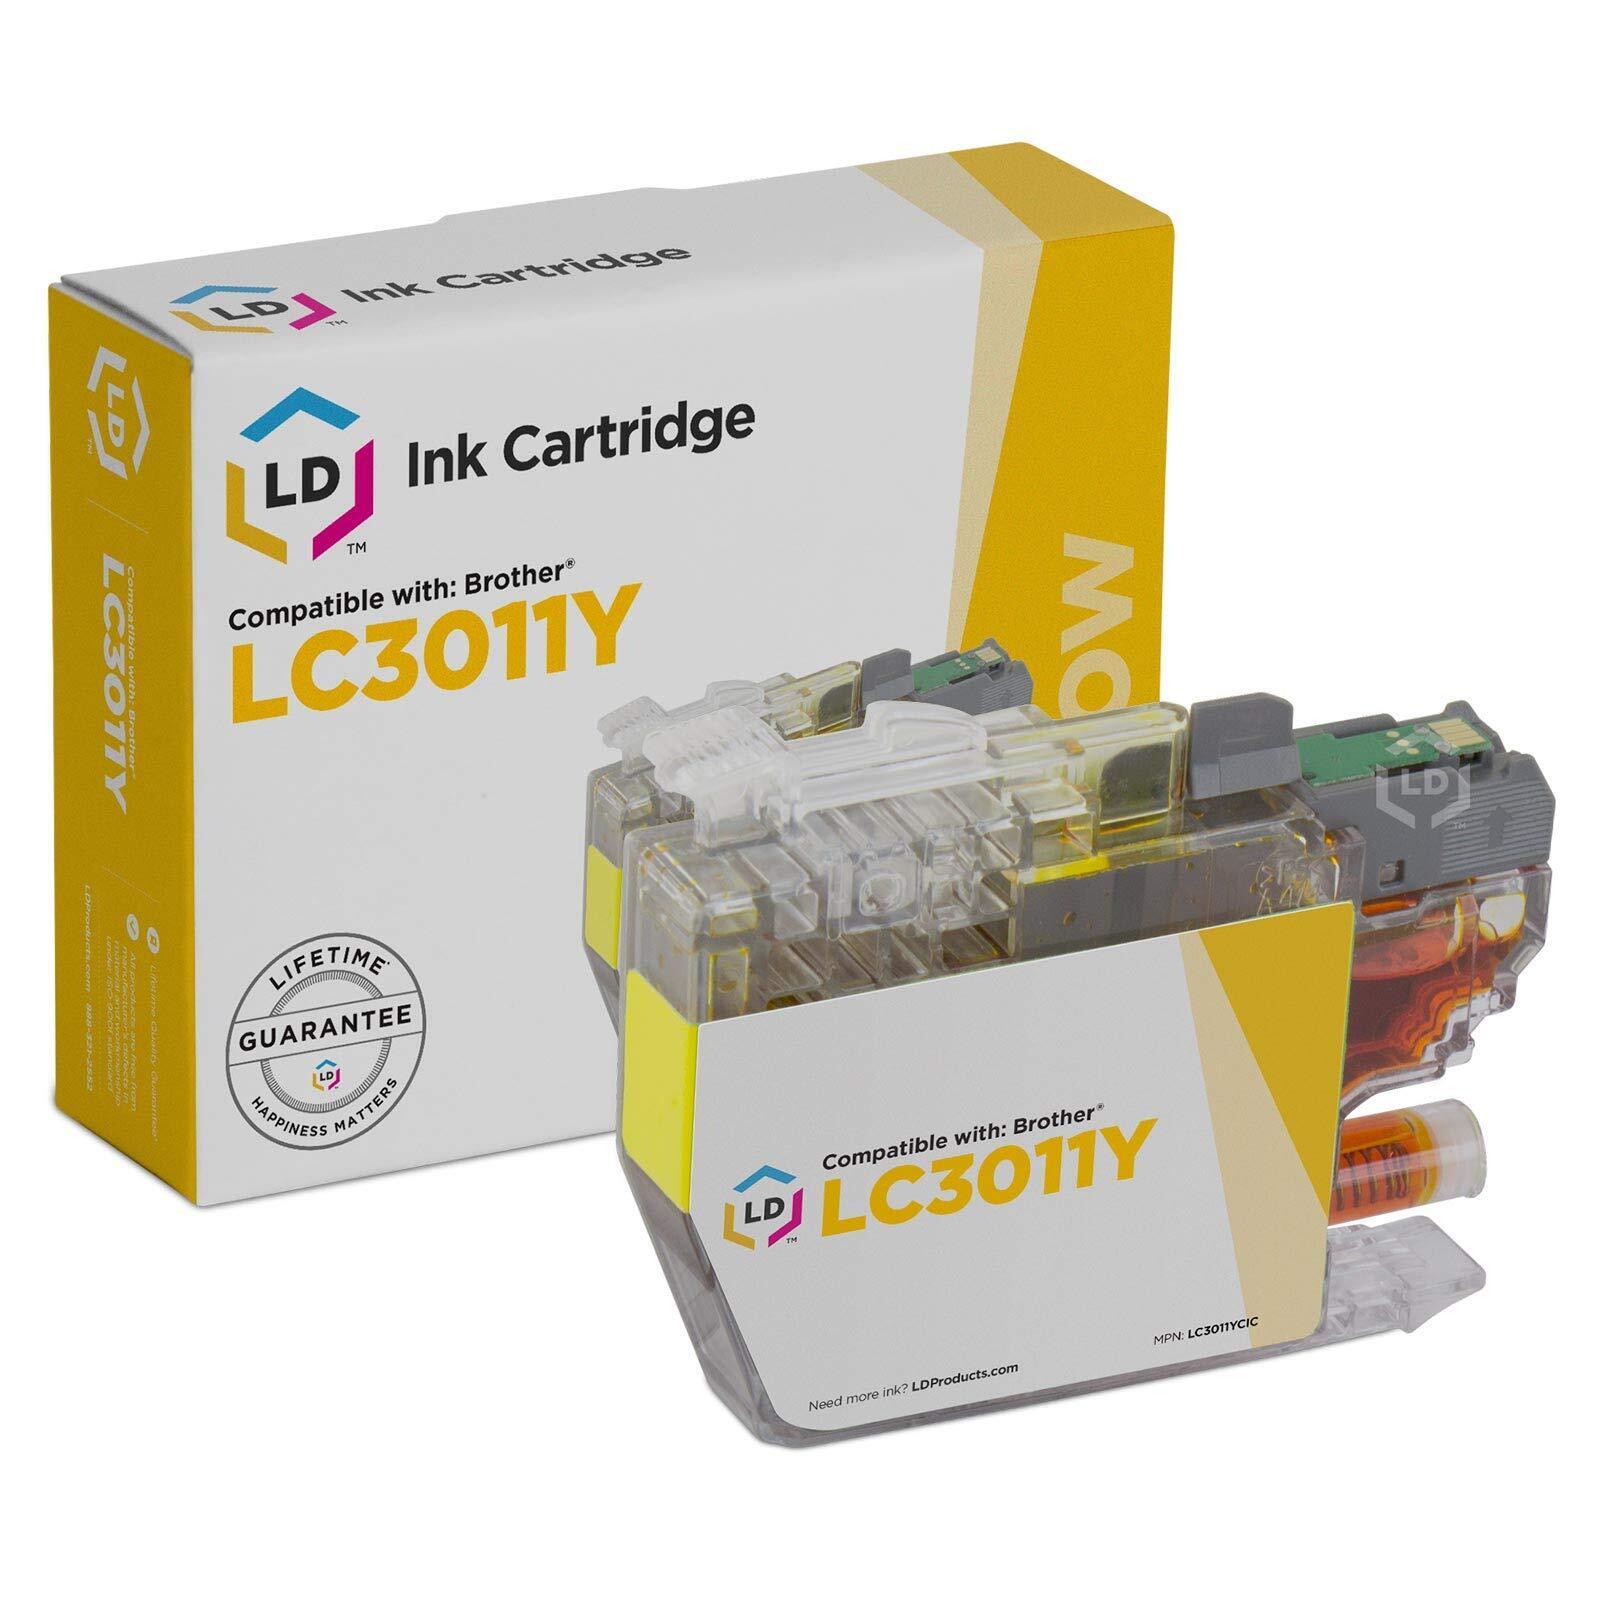 LD Compatible Replacement for Brother LC3011 / LC3011Y Yellow Ink Cartridge